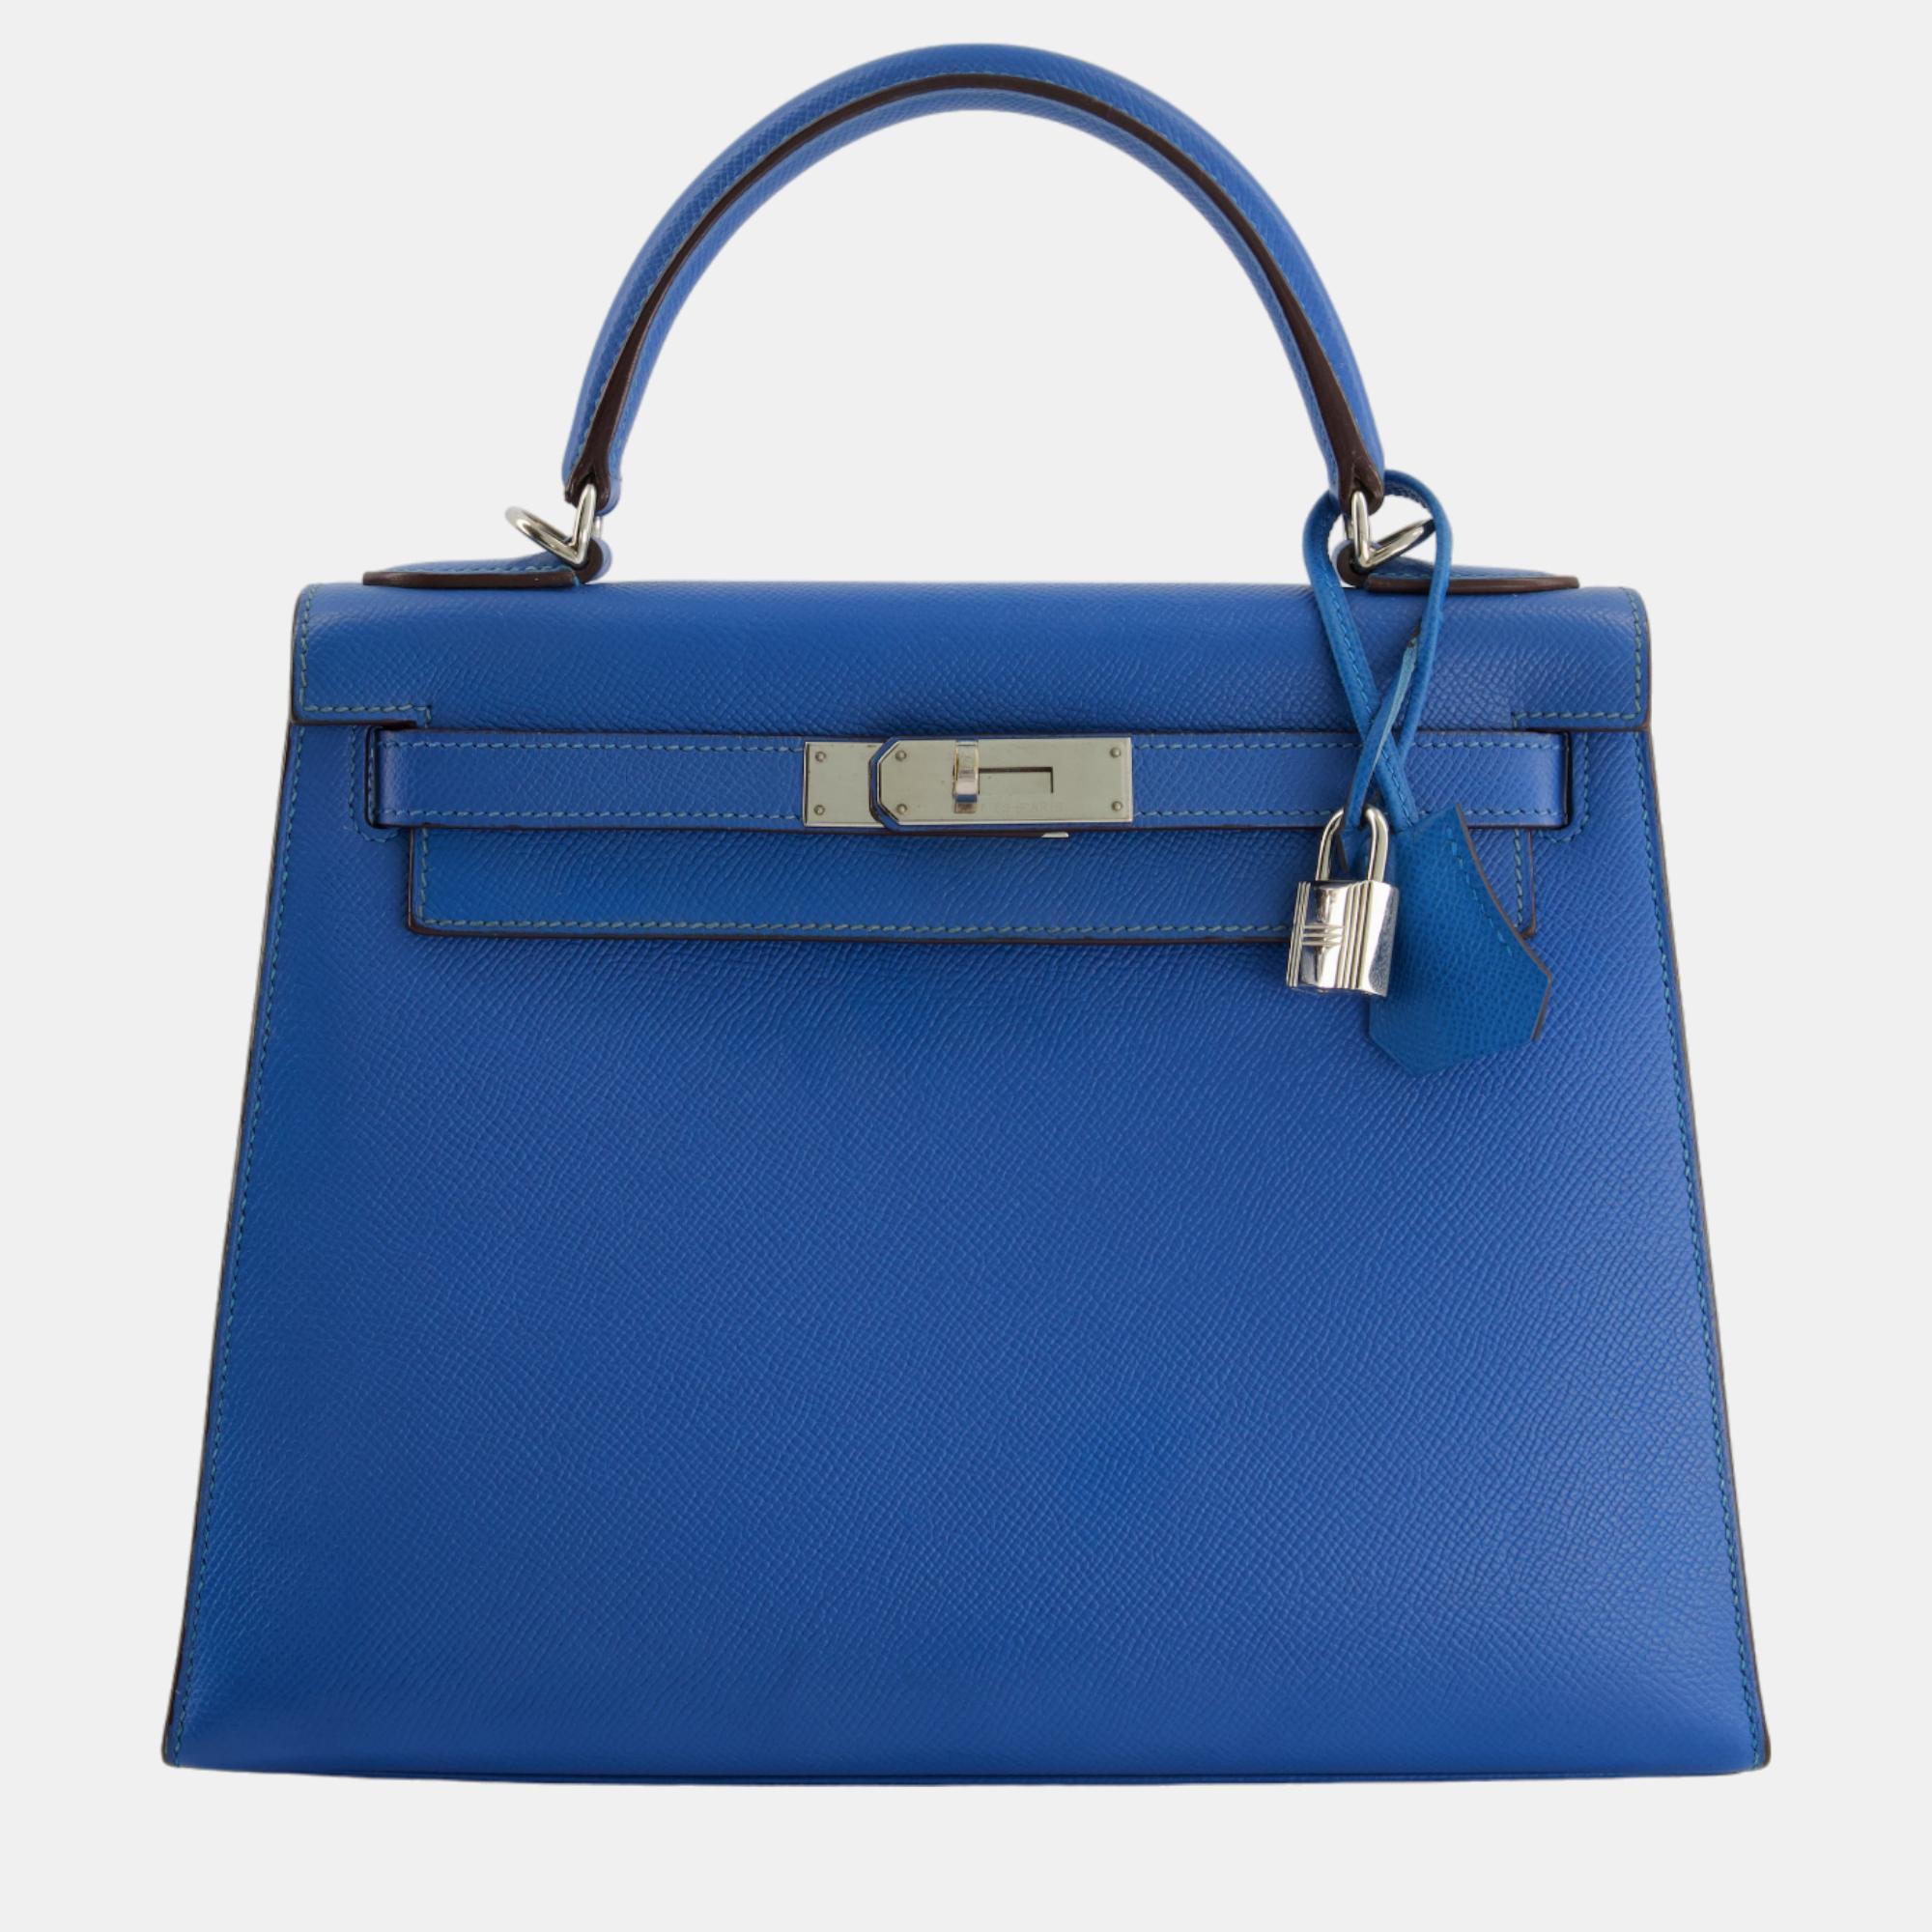 Hermes kelly  bag 28cm in blue electric epsom leather with palladium hardware